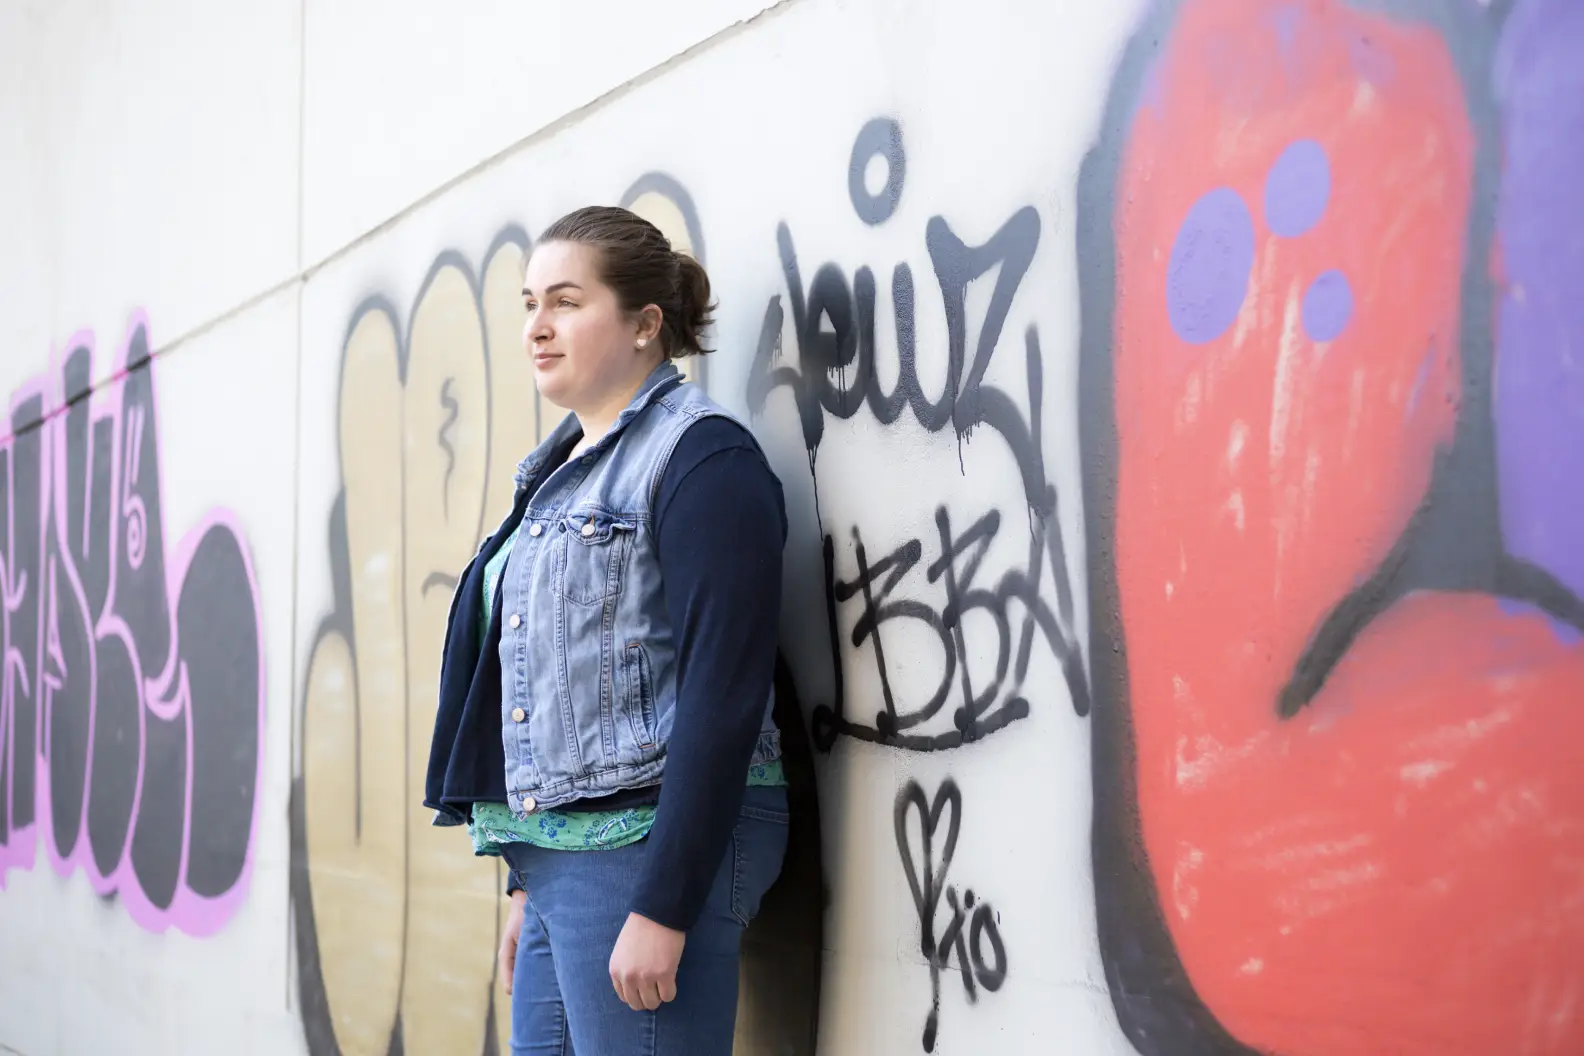 Young woman leaning against a wall that has graffiti on it